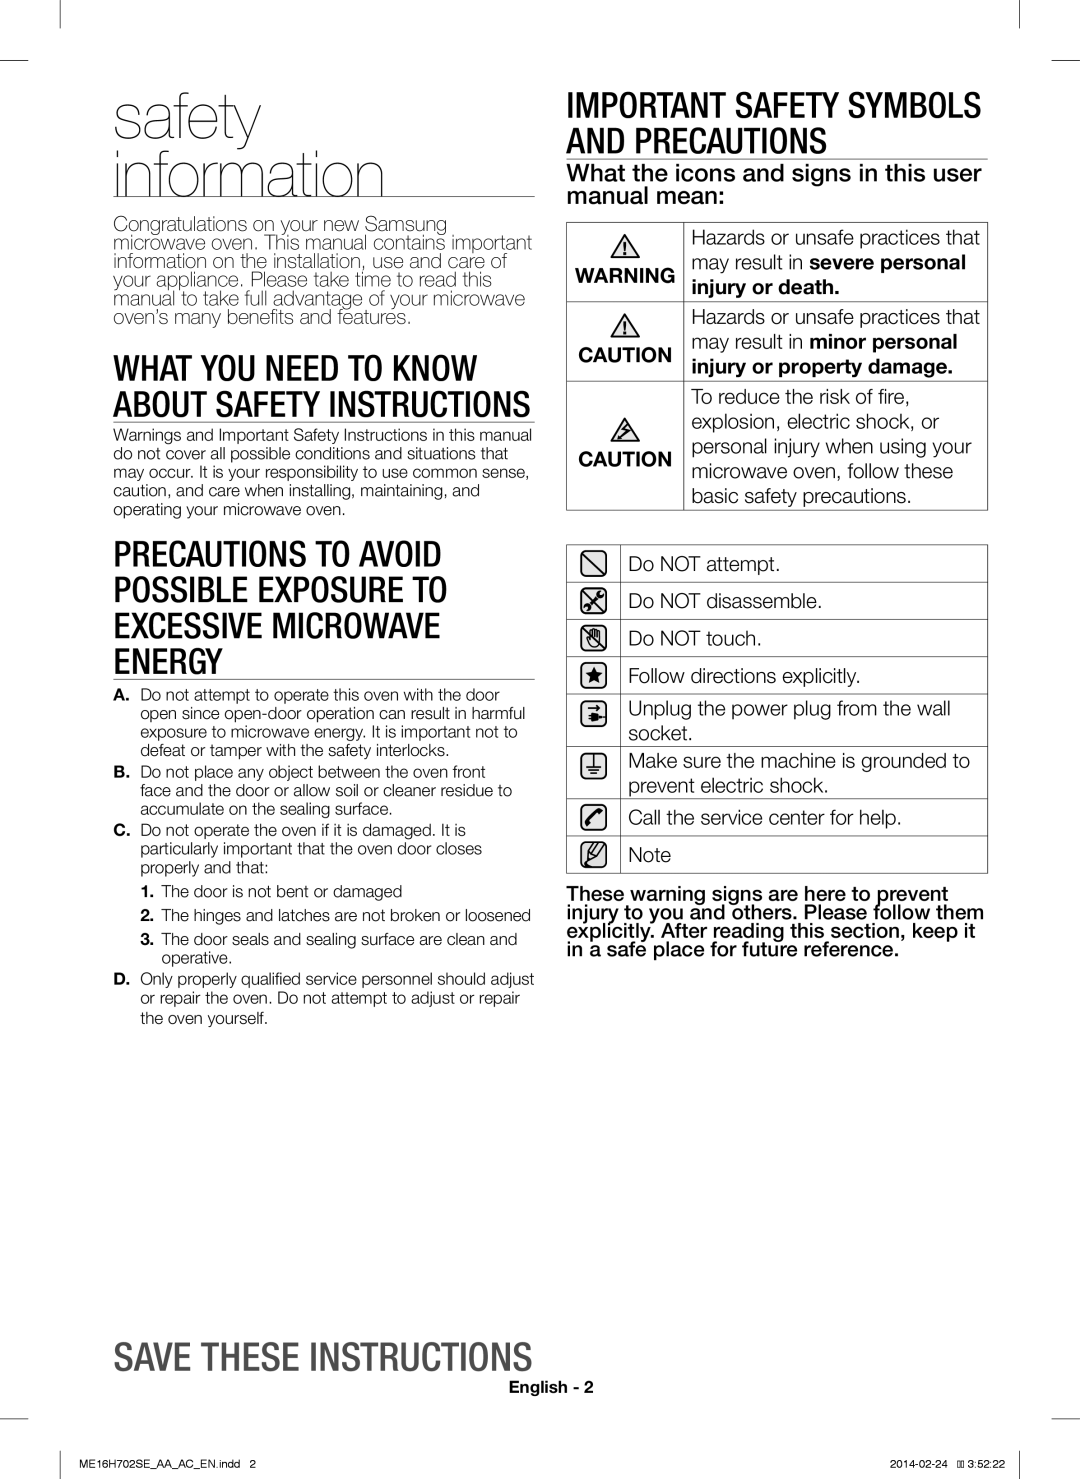 Samsung ME16H702SE safety information, Save These Instructions, Important Safety Symbols And Precautions, injury or death 